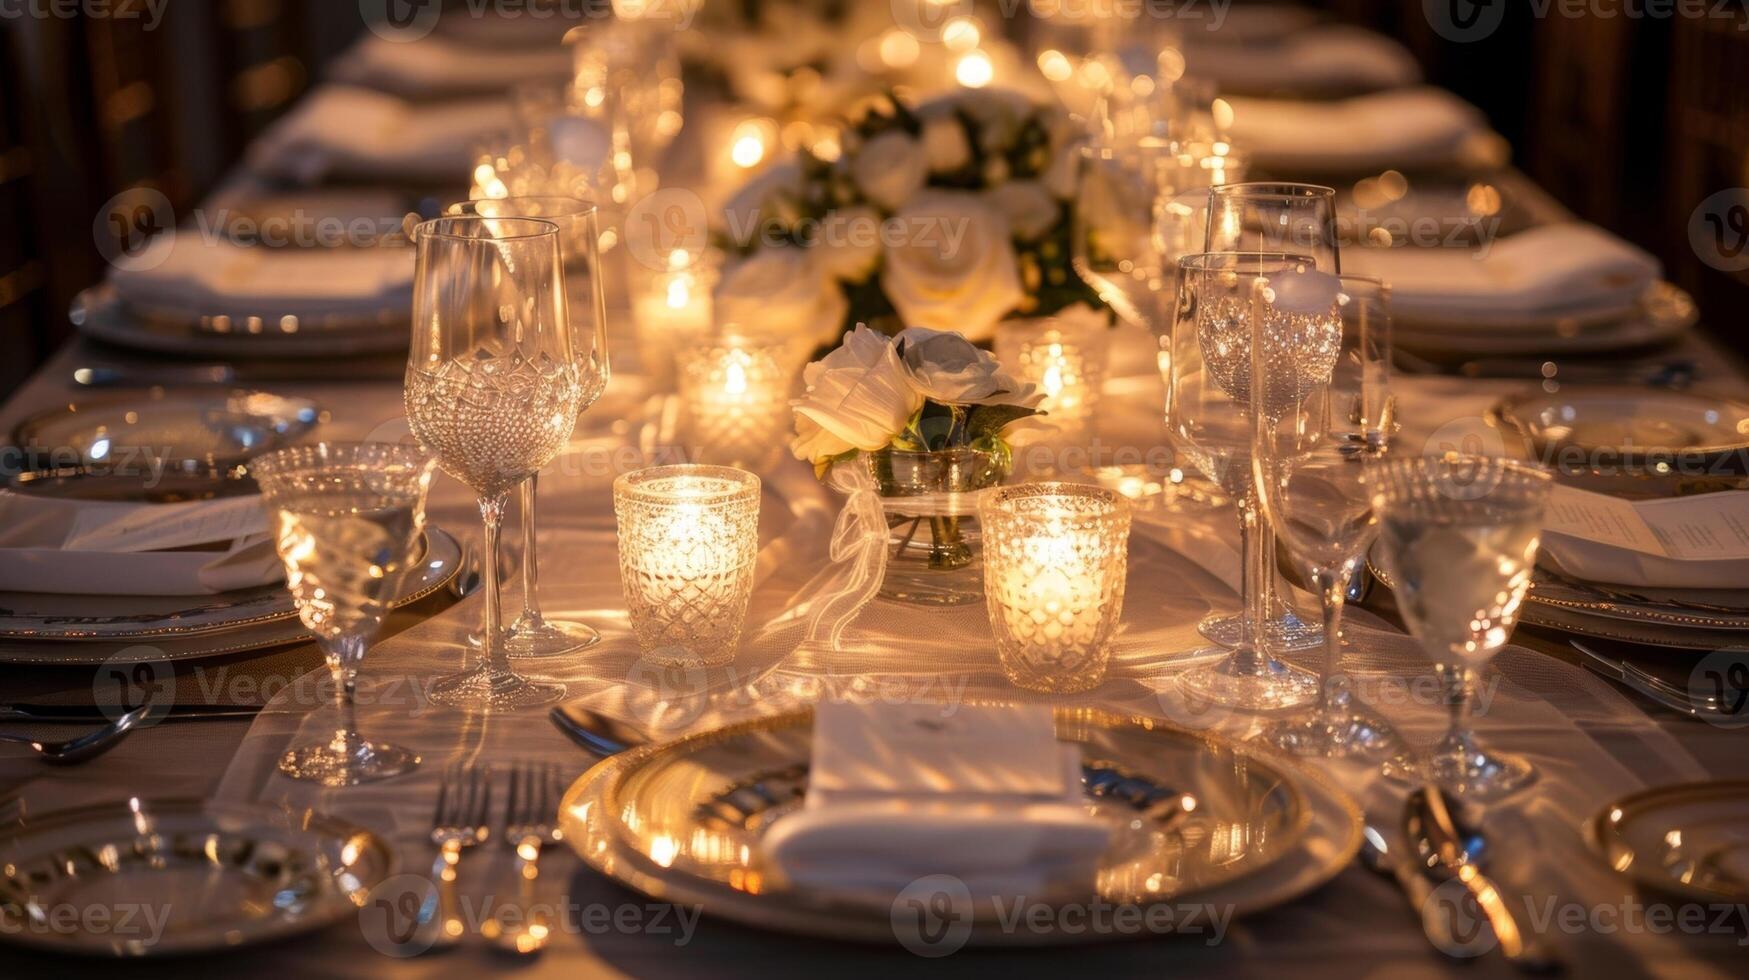 The soft warm light of the candles reflects off the polished silverware and crystal glasses creating a stunning and luxurious tablescape. 2d flat cartoon photo